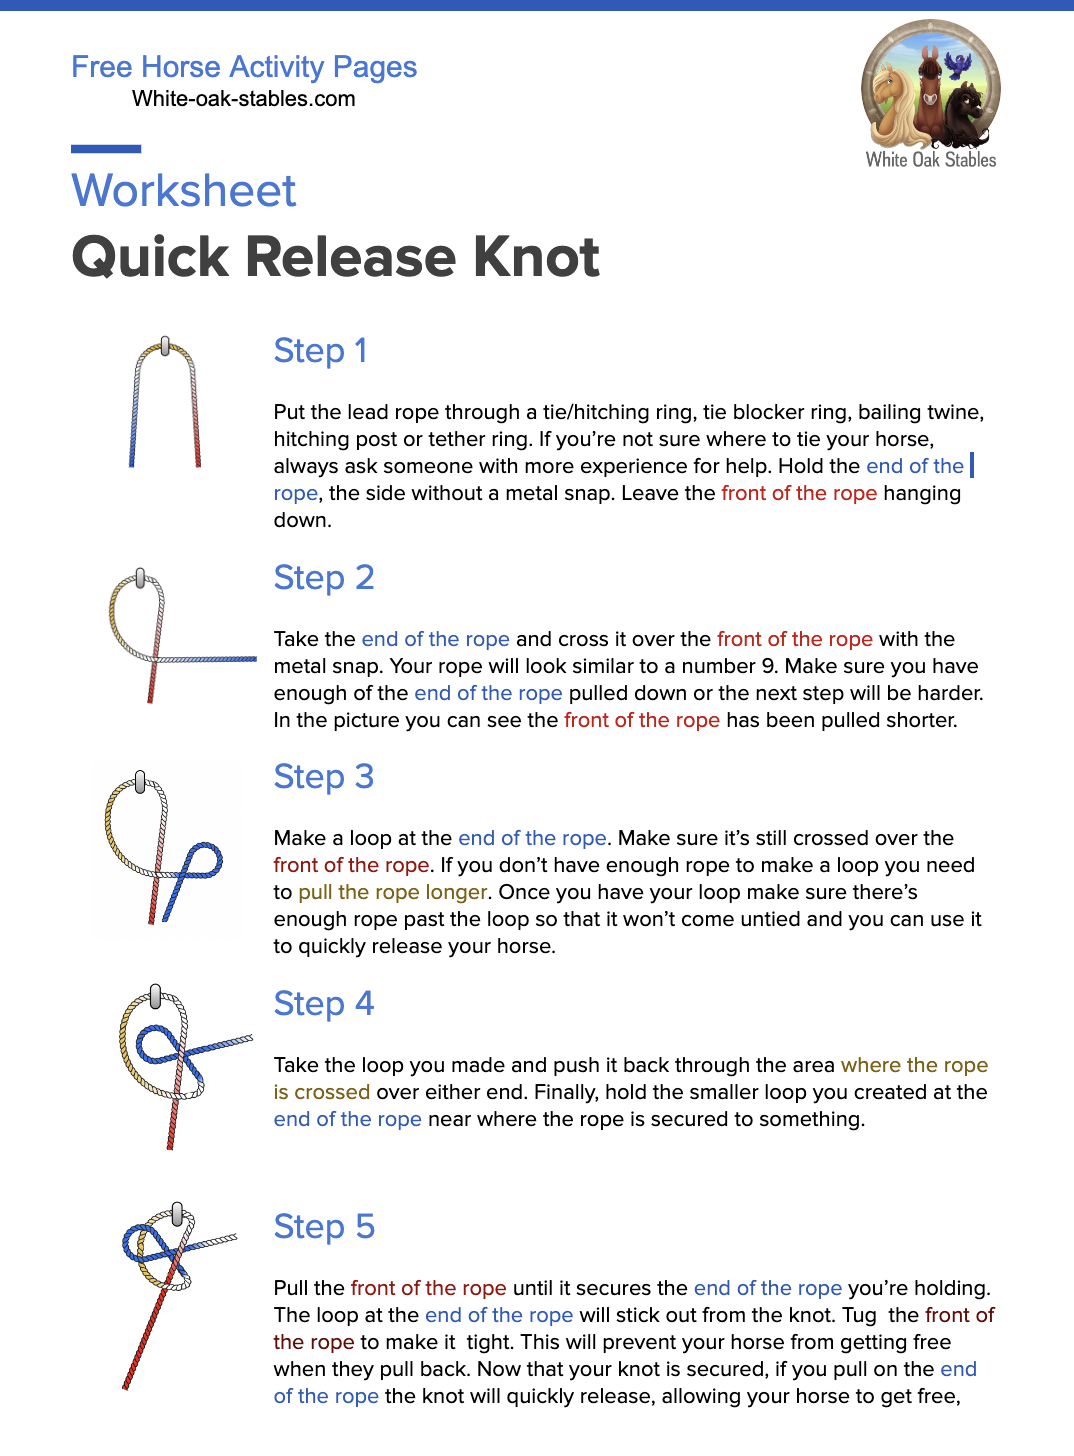 Worksheet – Quick Release Knot